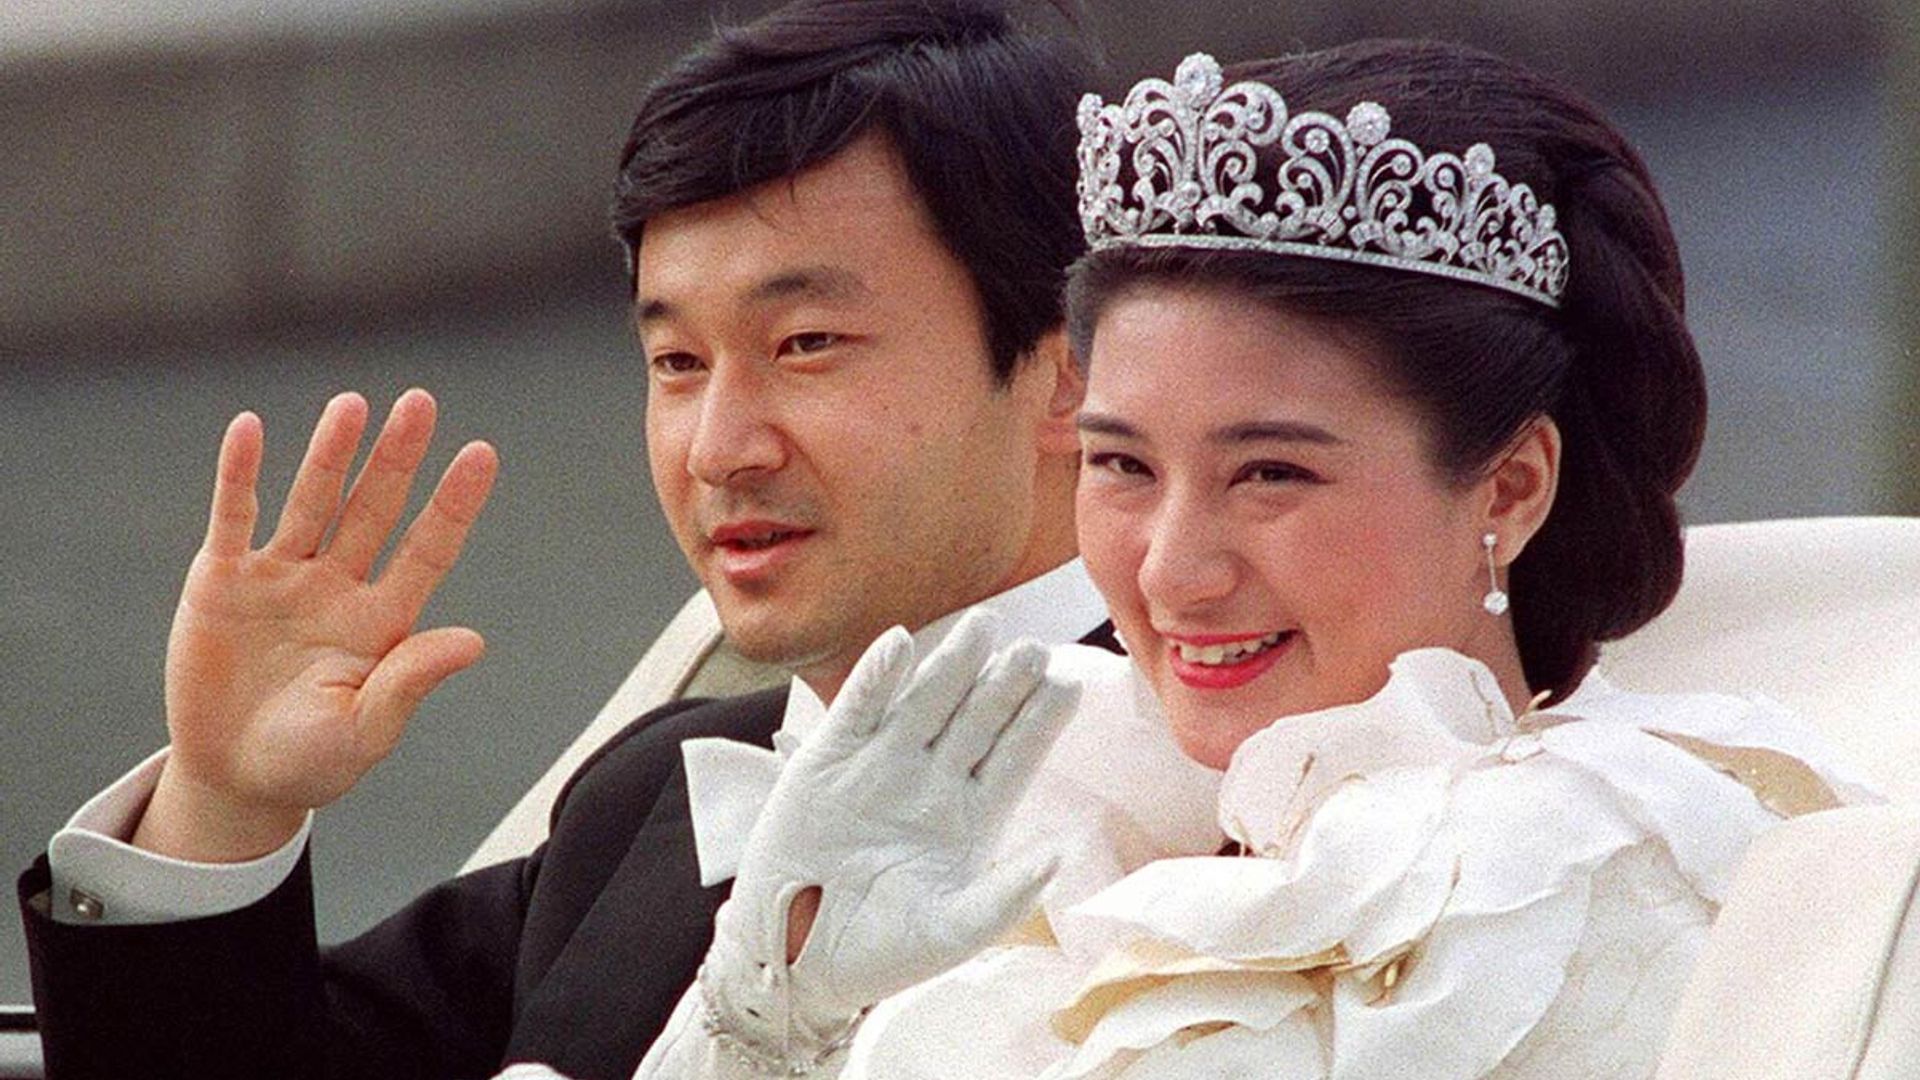 Japan's Emperor and Empress celebrate 28th wedding anniversary – but they almost didn't marry